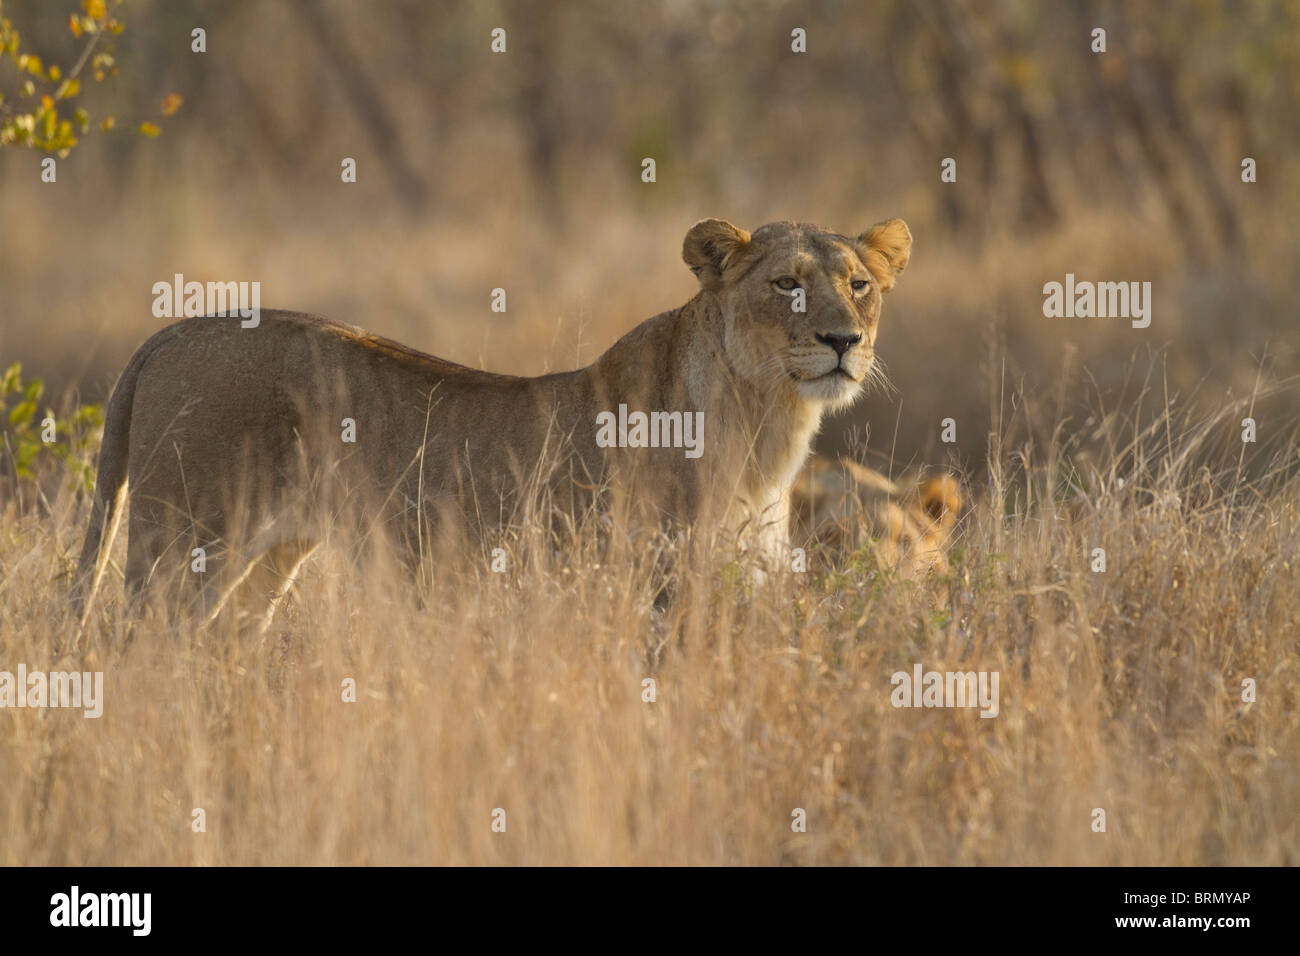 A lioness standing in a dry grassland staring intently ahead Stock Photo